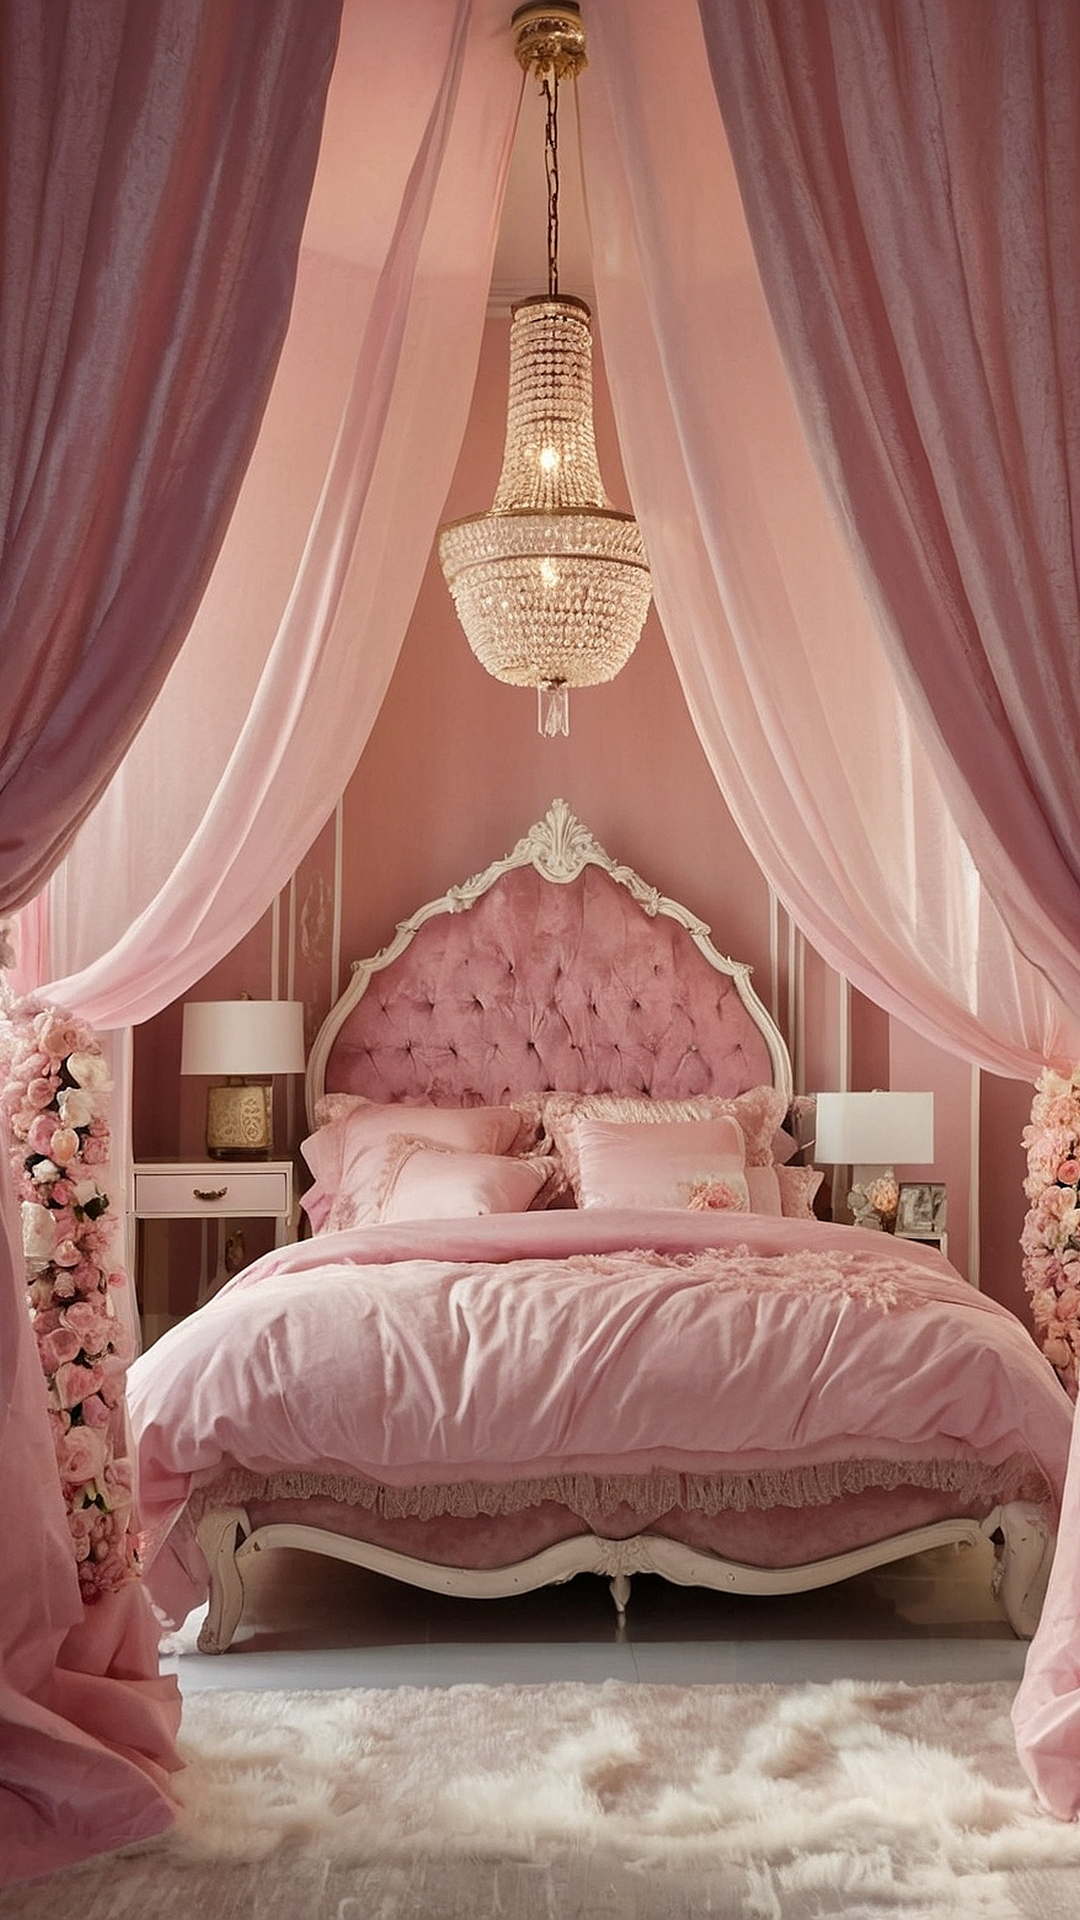 <p>As you step into your bedroom, a world of whimsy unfolds before your eyes - soft pink hues dance across the walls like a gentle spring breeze. Imagine curling up on a plush velvet chair in the corner, surrounded by delicate floral accents and twinkling fairy lights that cast a warm, magical glow. The air is filled with the sweet scent of blooming peonies, transporting you to a place of serenity and comfort.</p><p>Now, envision your bed transformed into a sanctuary of plush pillows and luxurious textures, inviting you to sink into a sea of softness after a long day. The curtains flutter gently in the breeze, revealing a view of the moonlit sky outside. In this pink haven, every detail is meticulously curated to bring a sense of joy and playfulness to your space. Let your imagination run wild as you embrace the whimsical charm of this enchanted retreat that feels like a dream come true.</p>